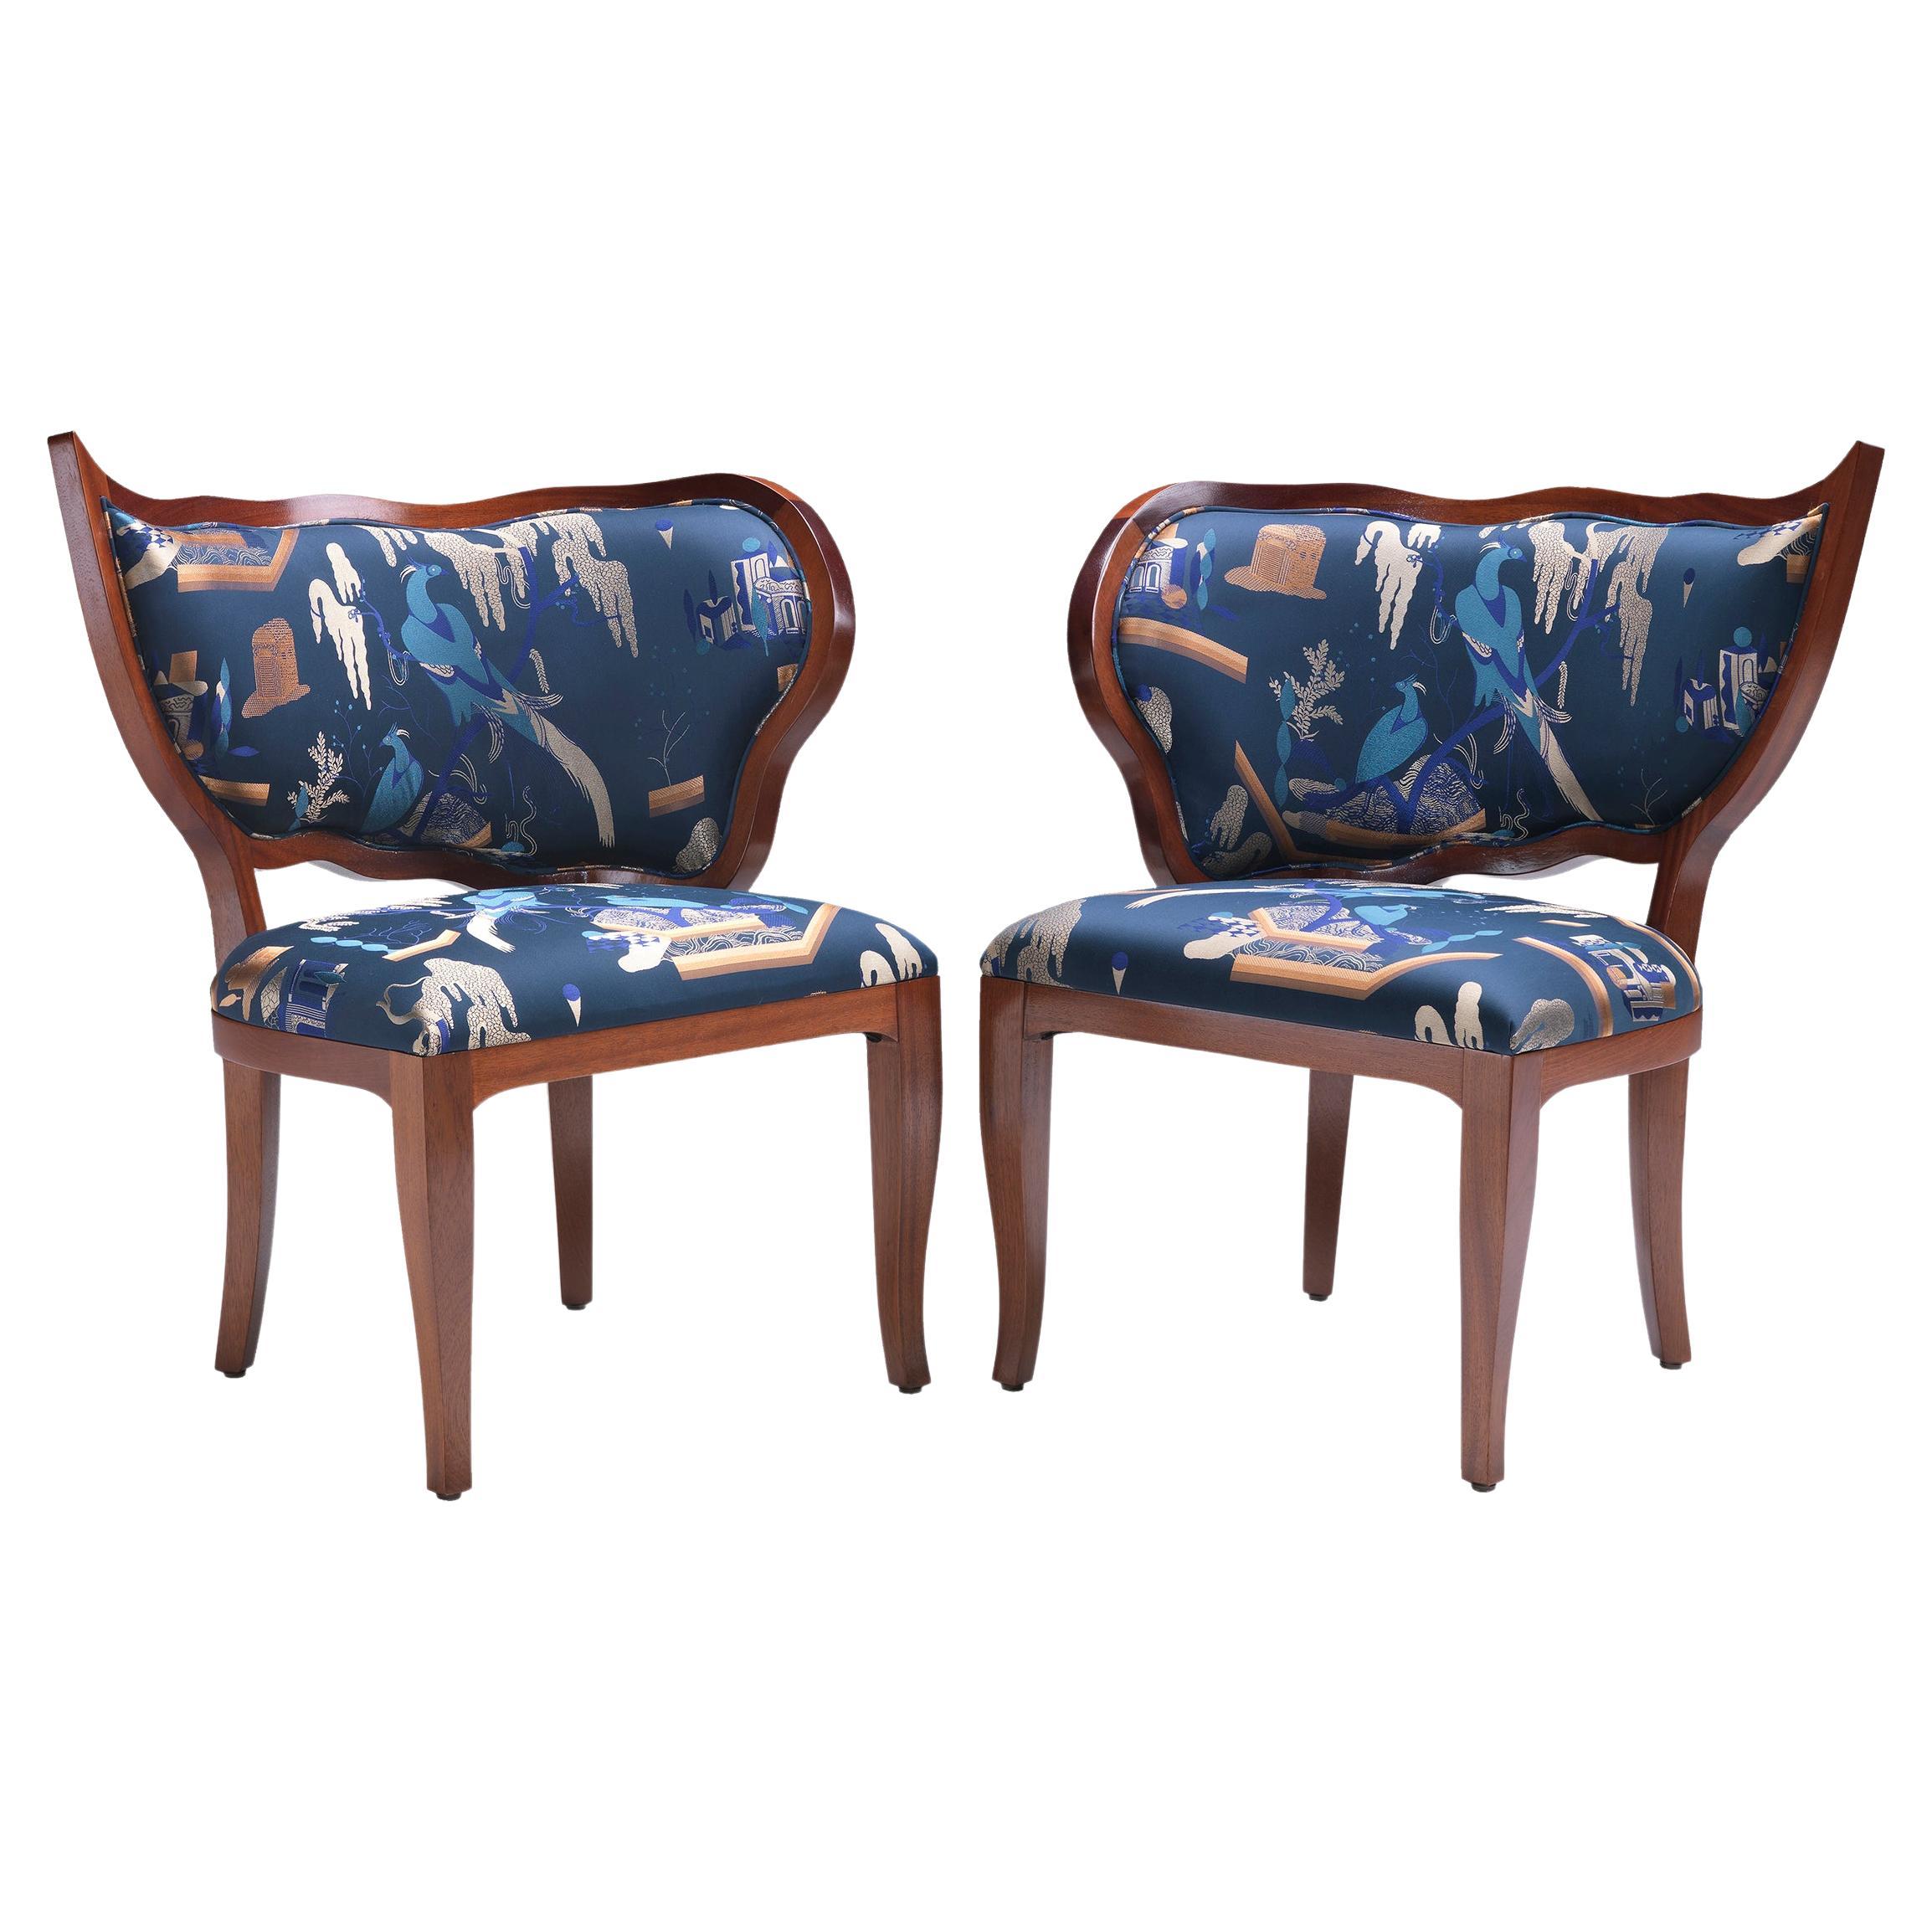 CIUFFO Dining chairs with blue parrots padded seat and back solid mahogany wood